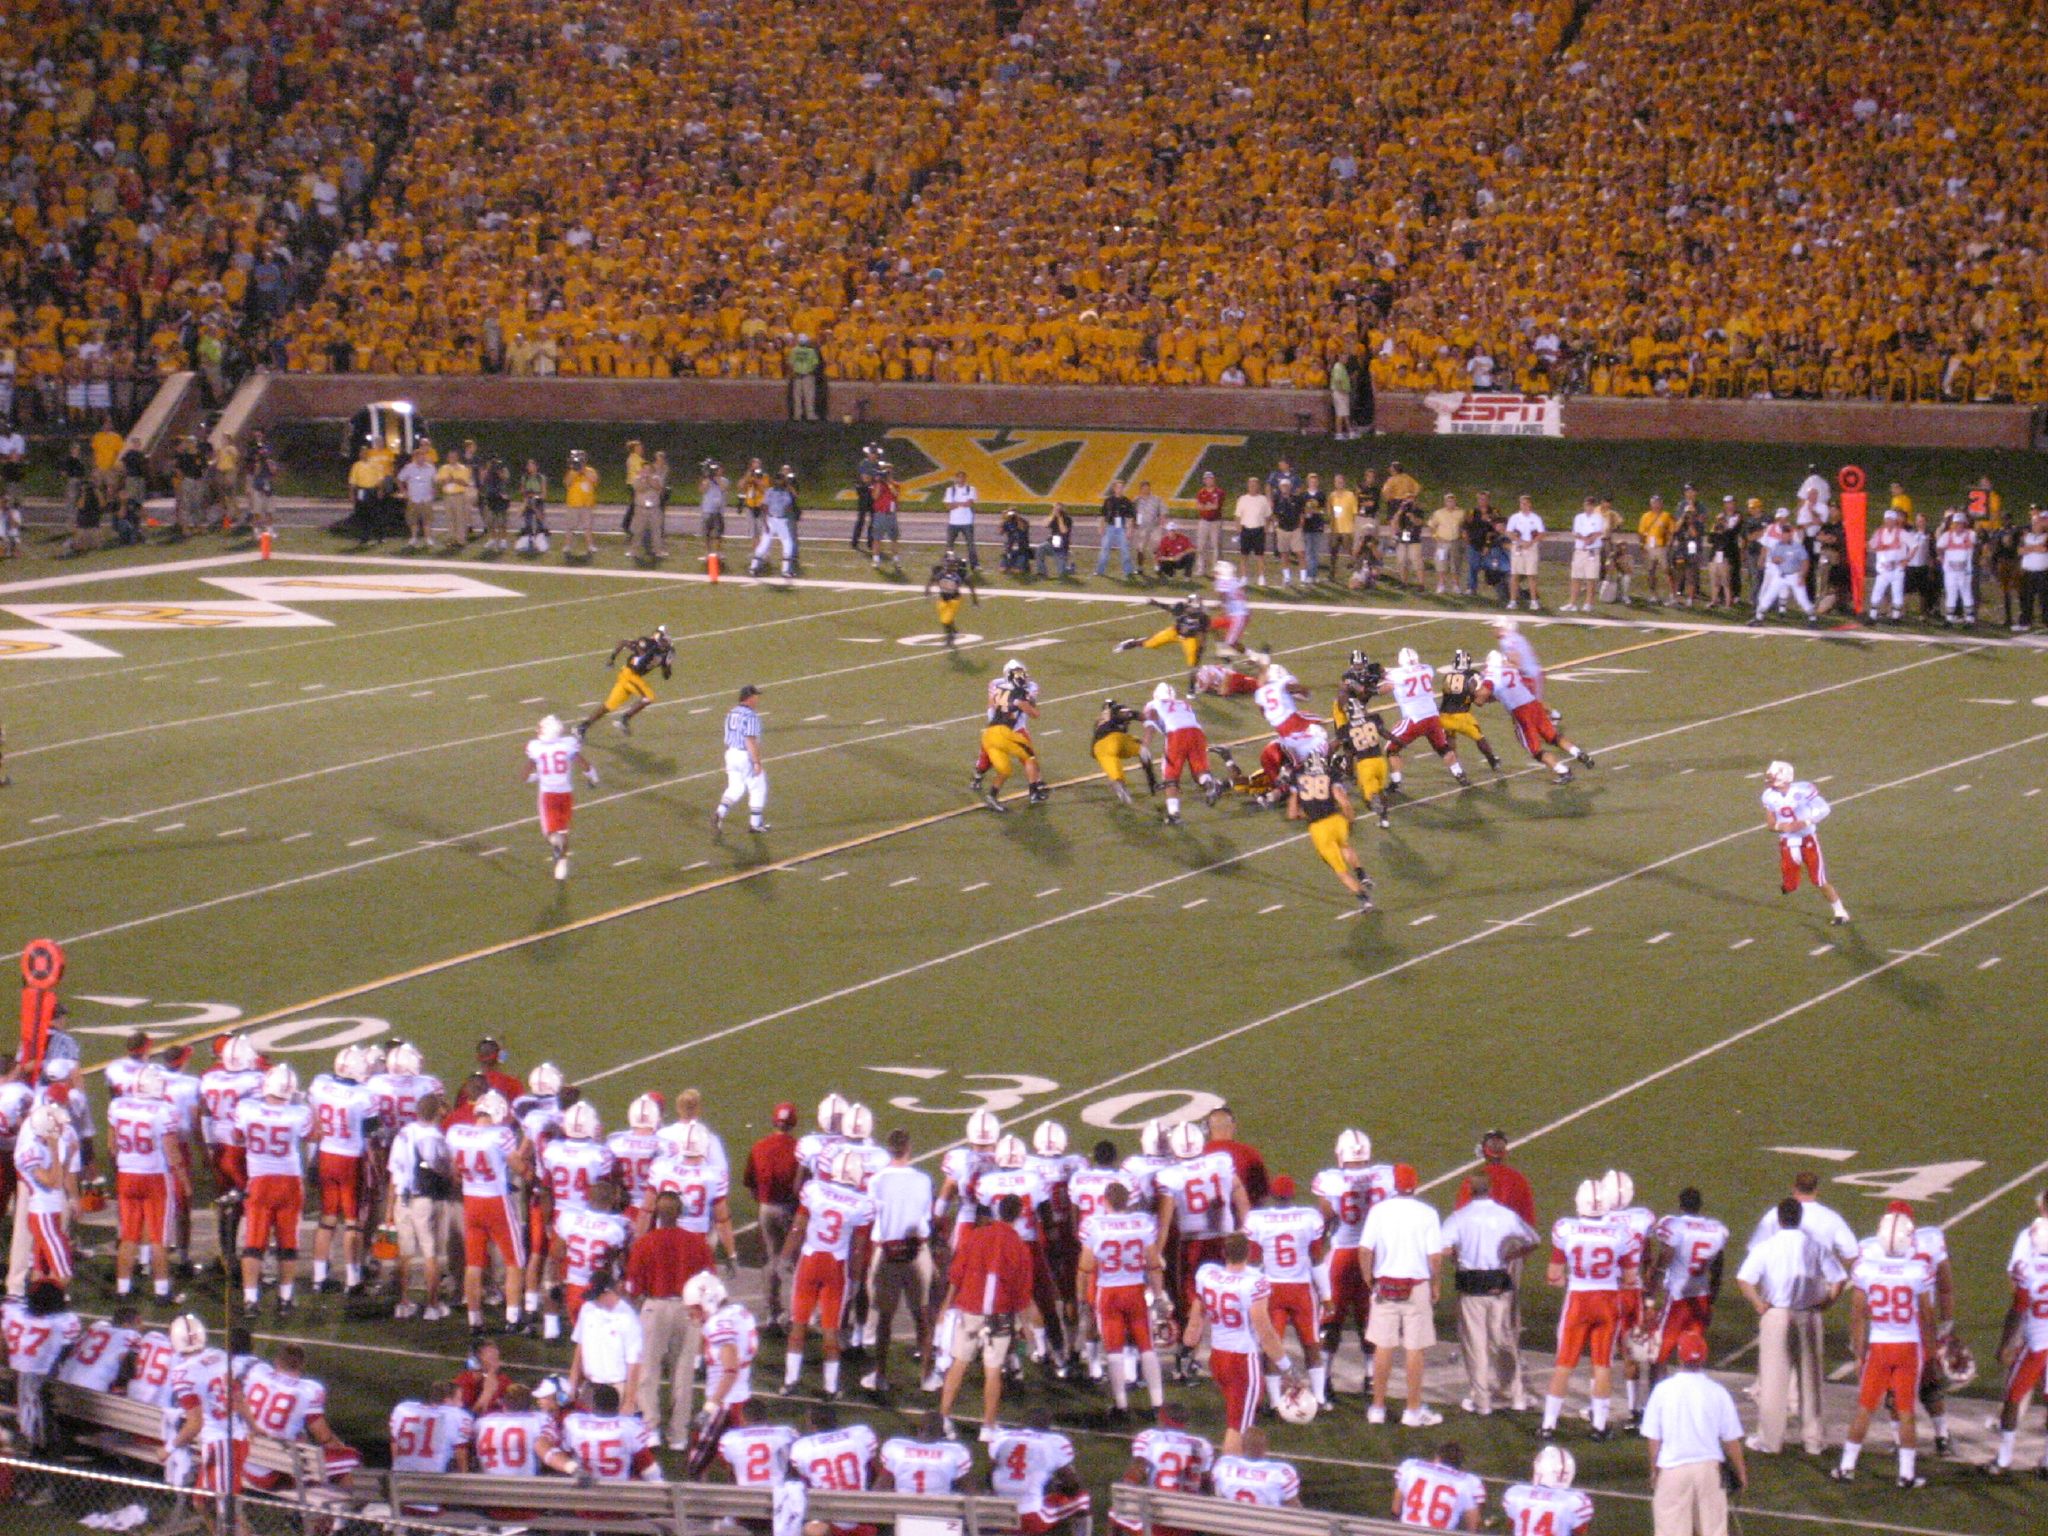 a football game being played with the teams on the field